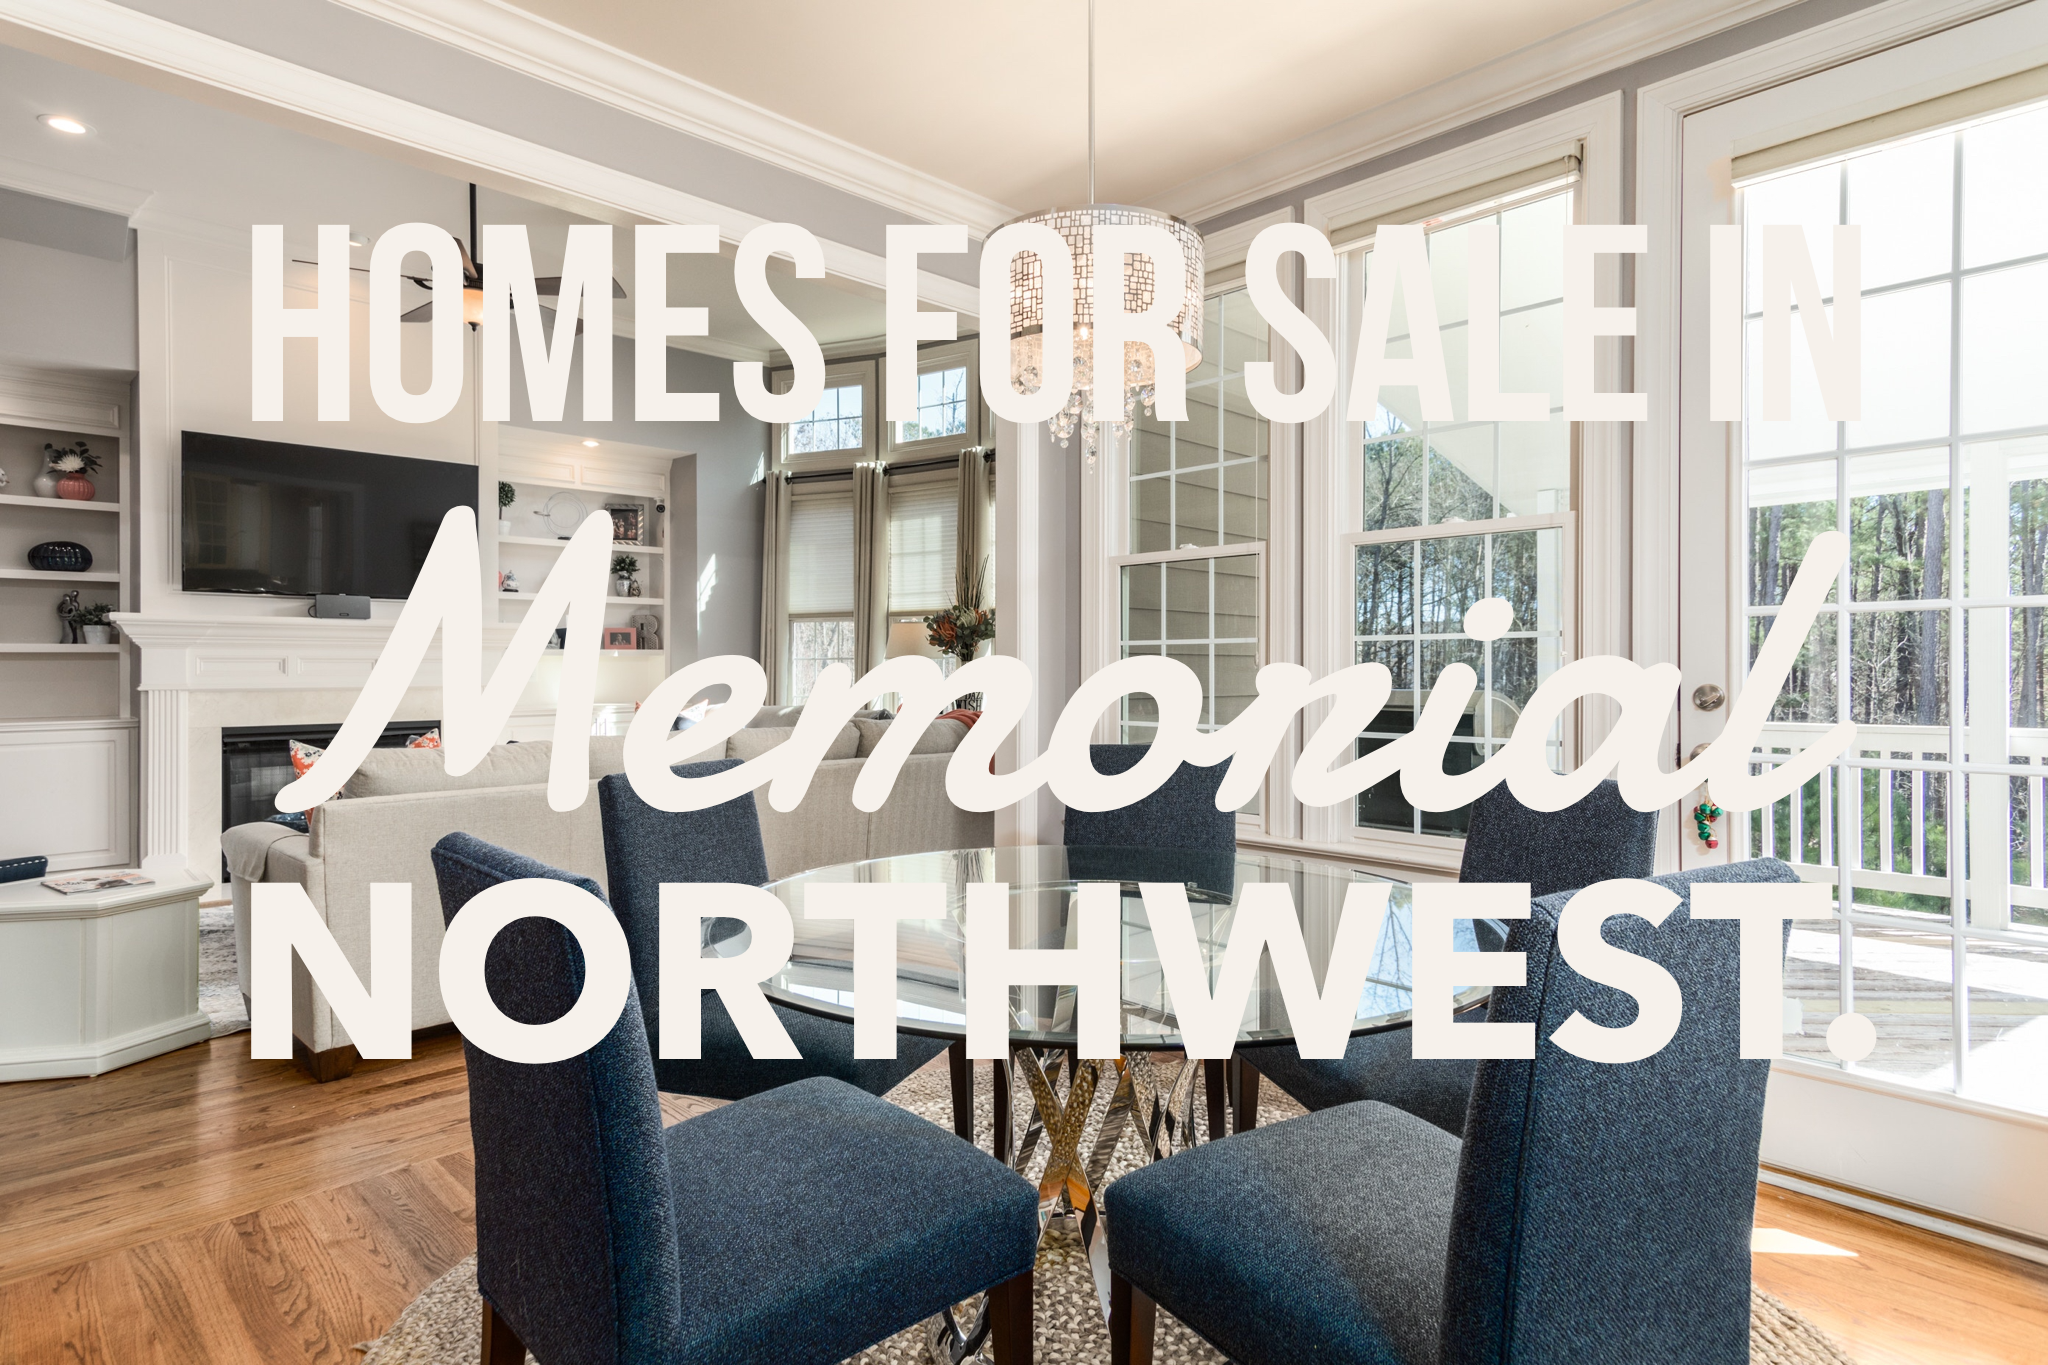 beautiful home in memorial northwest - homes for sale in memorial northwest - open houses in memorial northwest - real estate agent and realtor, jordan marie schilleci, jo & co. realty group